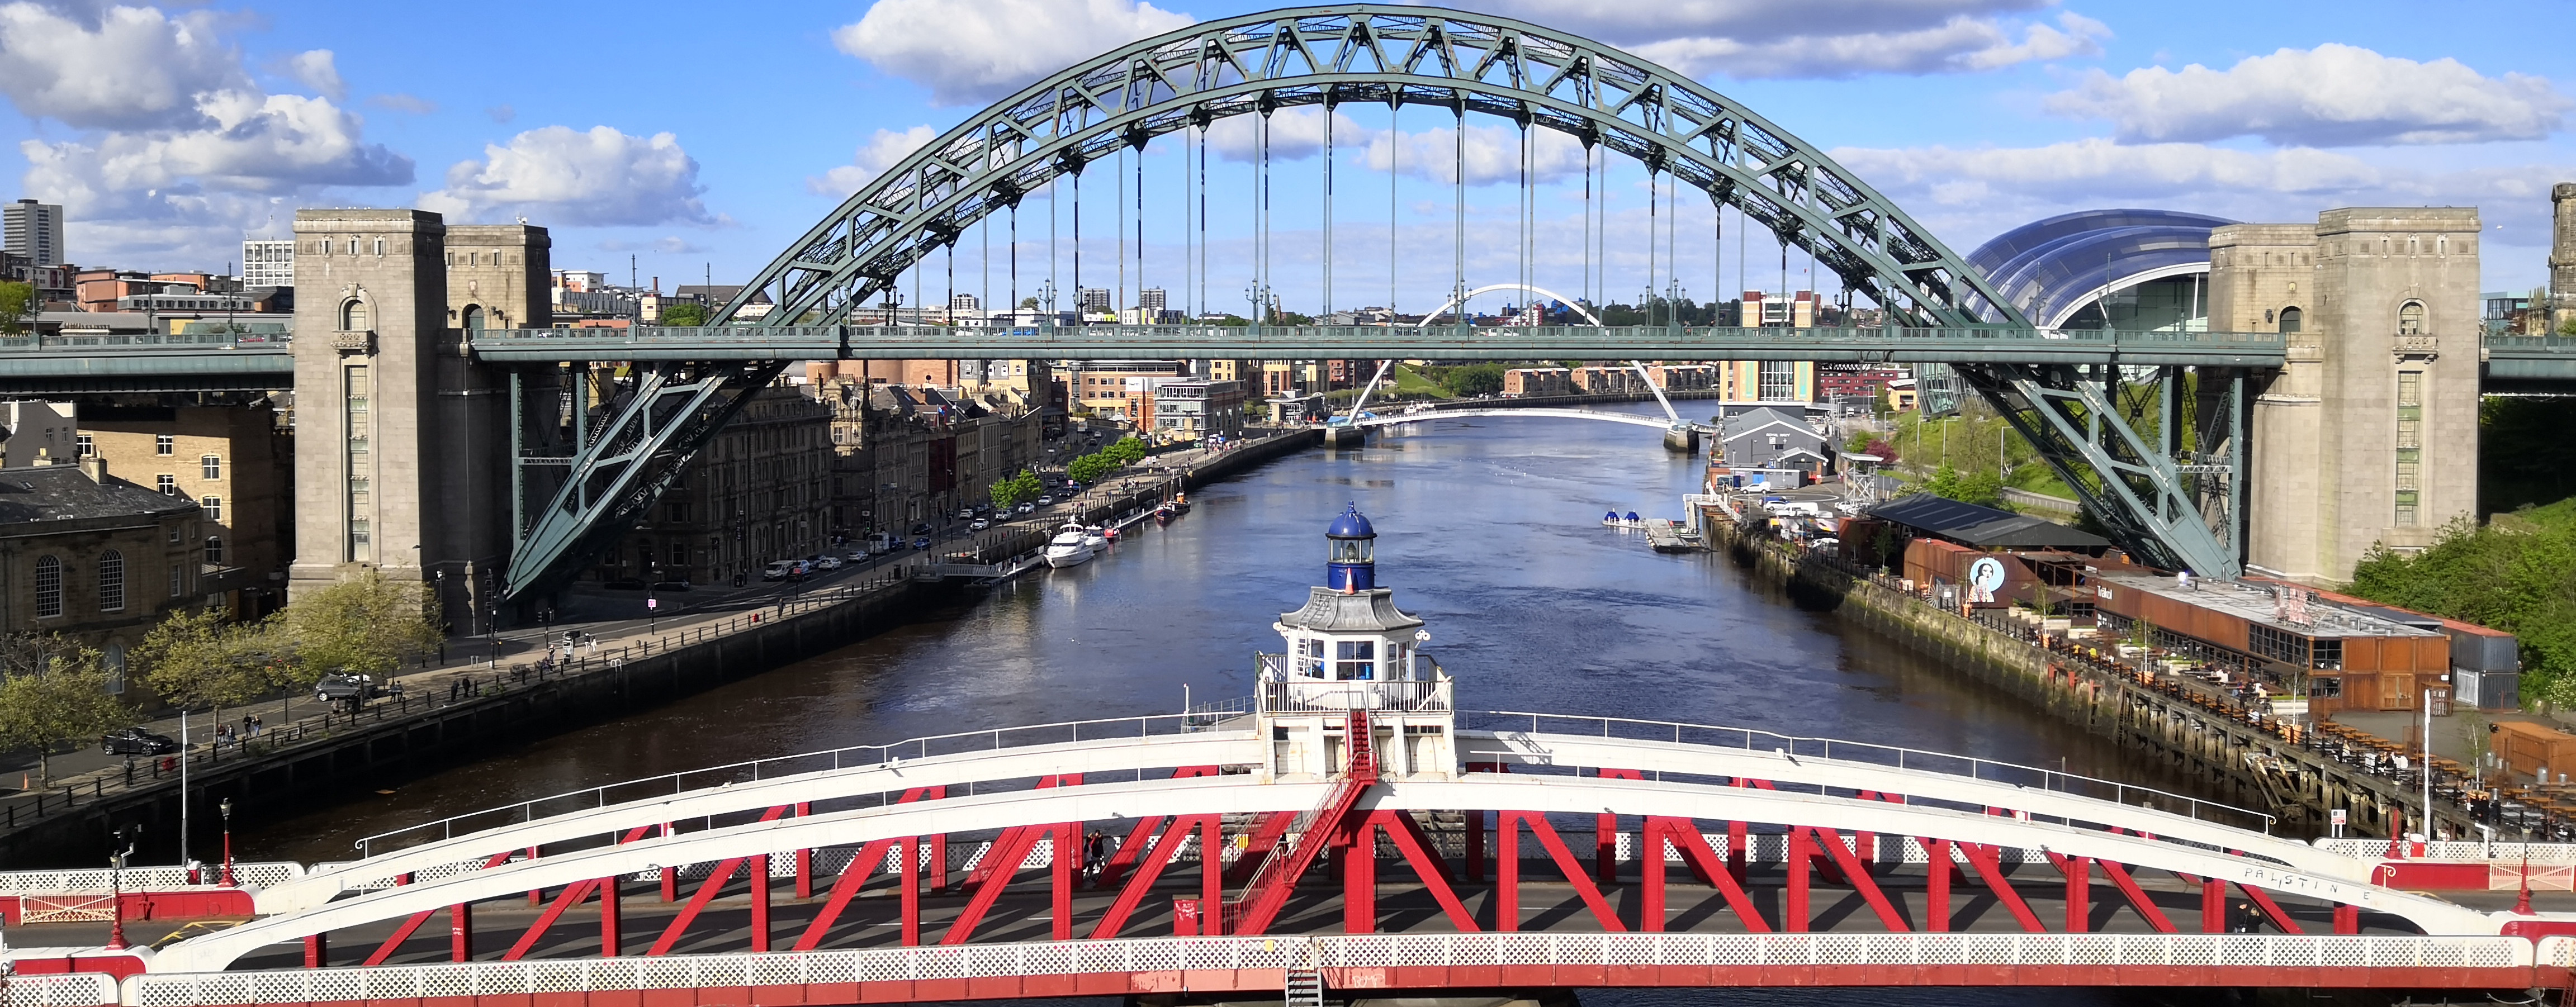 A phto of the Bridges over the River Tyne